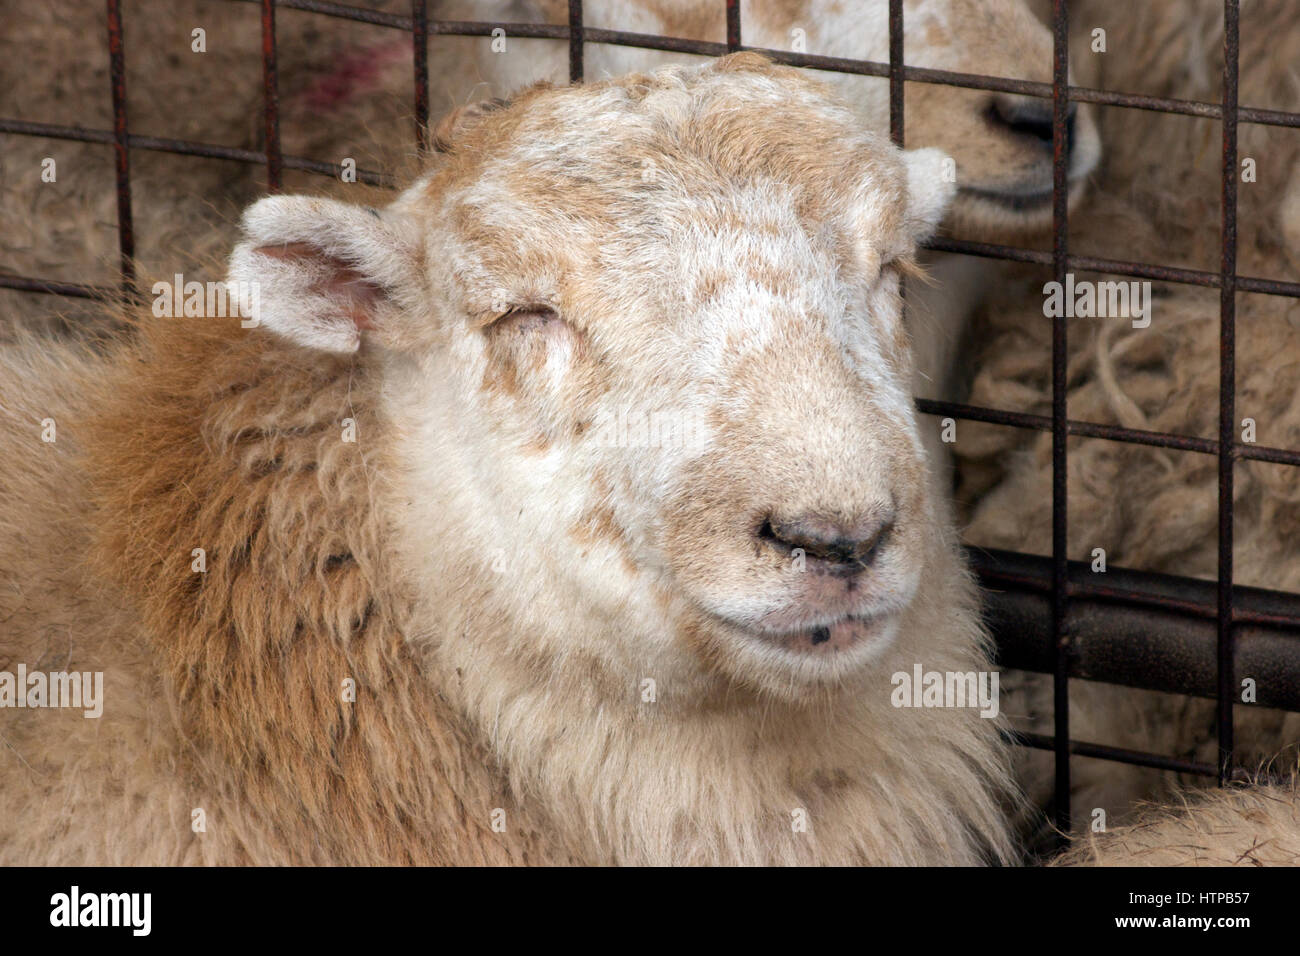 Sheep in auction at Newport, Wales, United Kingdom Stock Photo